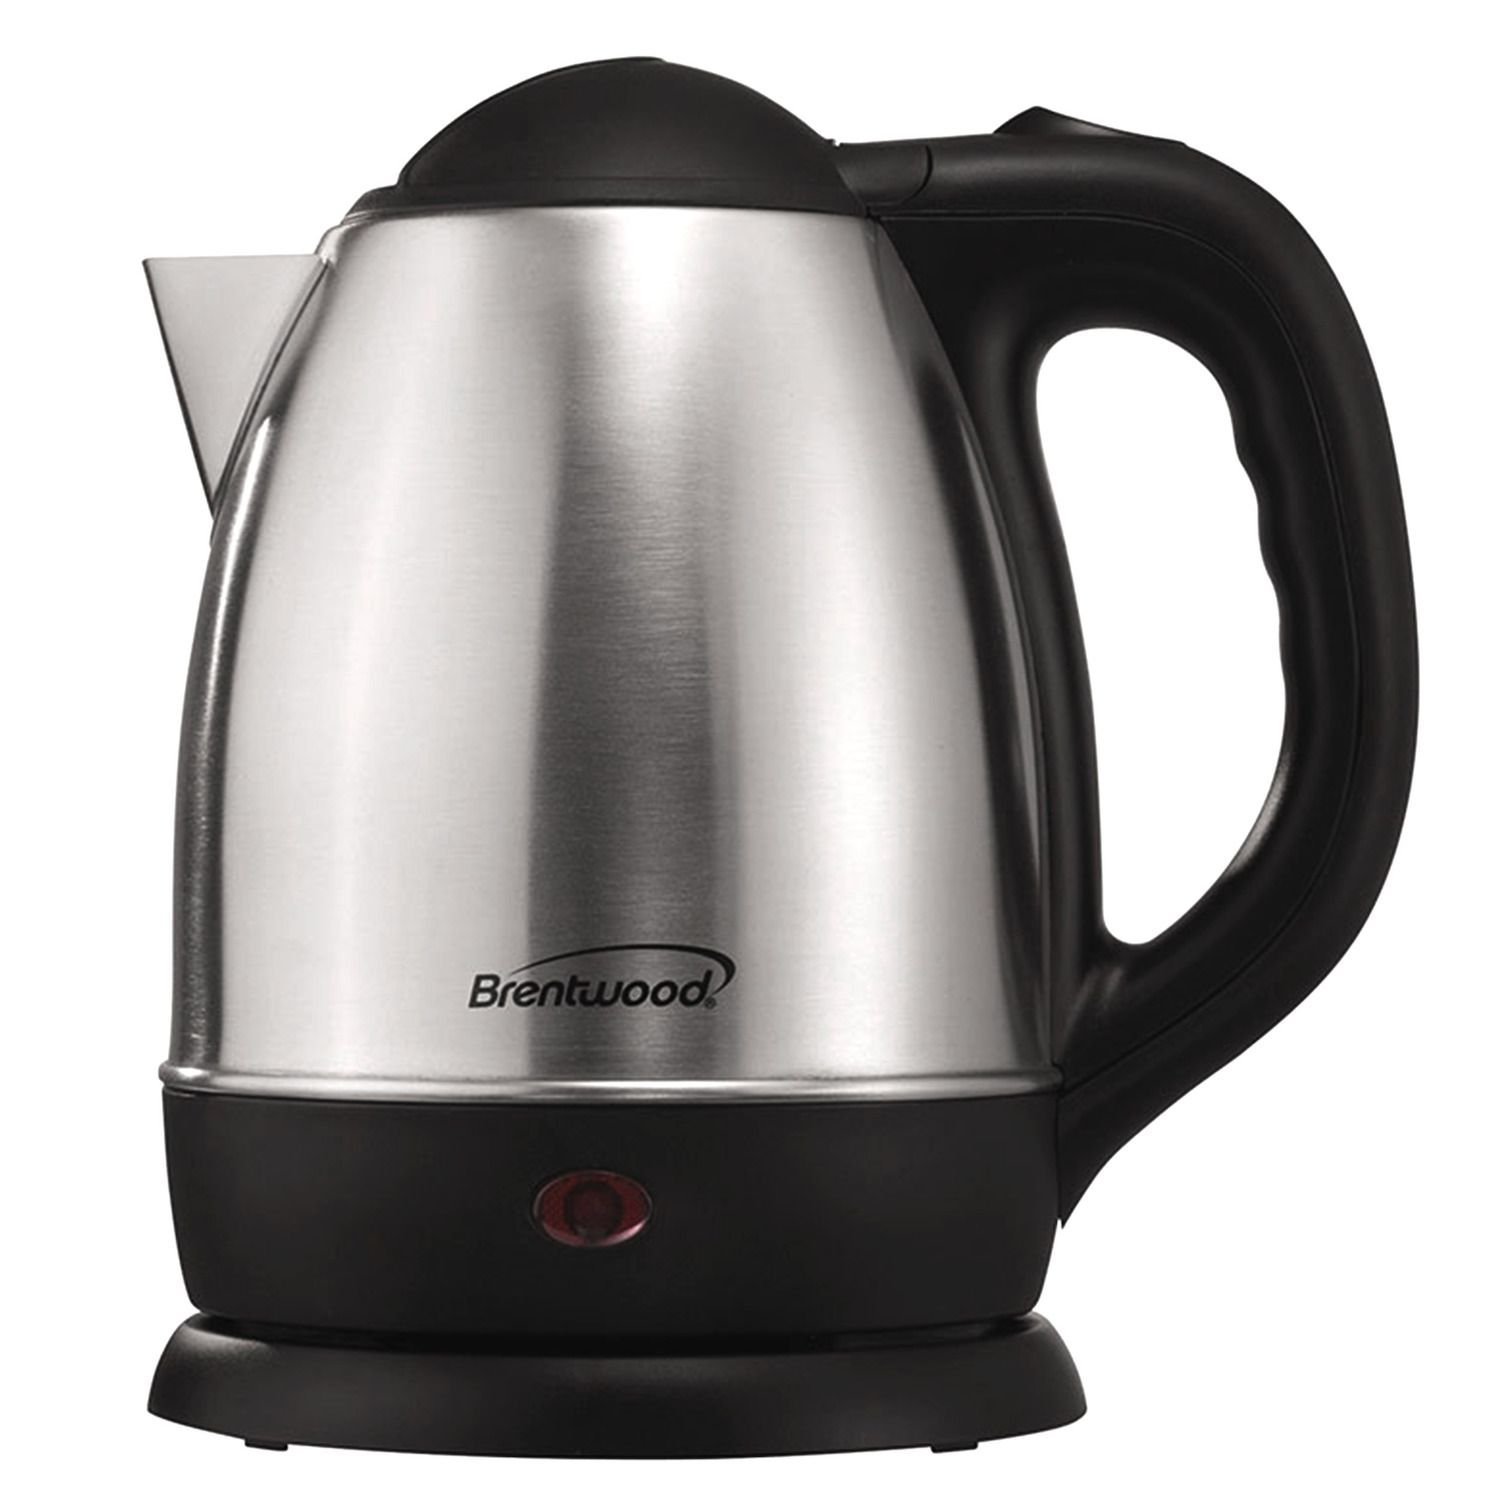 Dash 1.7-Liter Insulated Electric Kettle Black